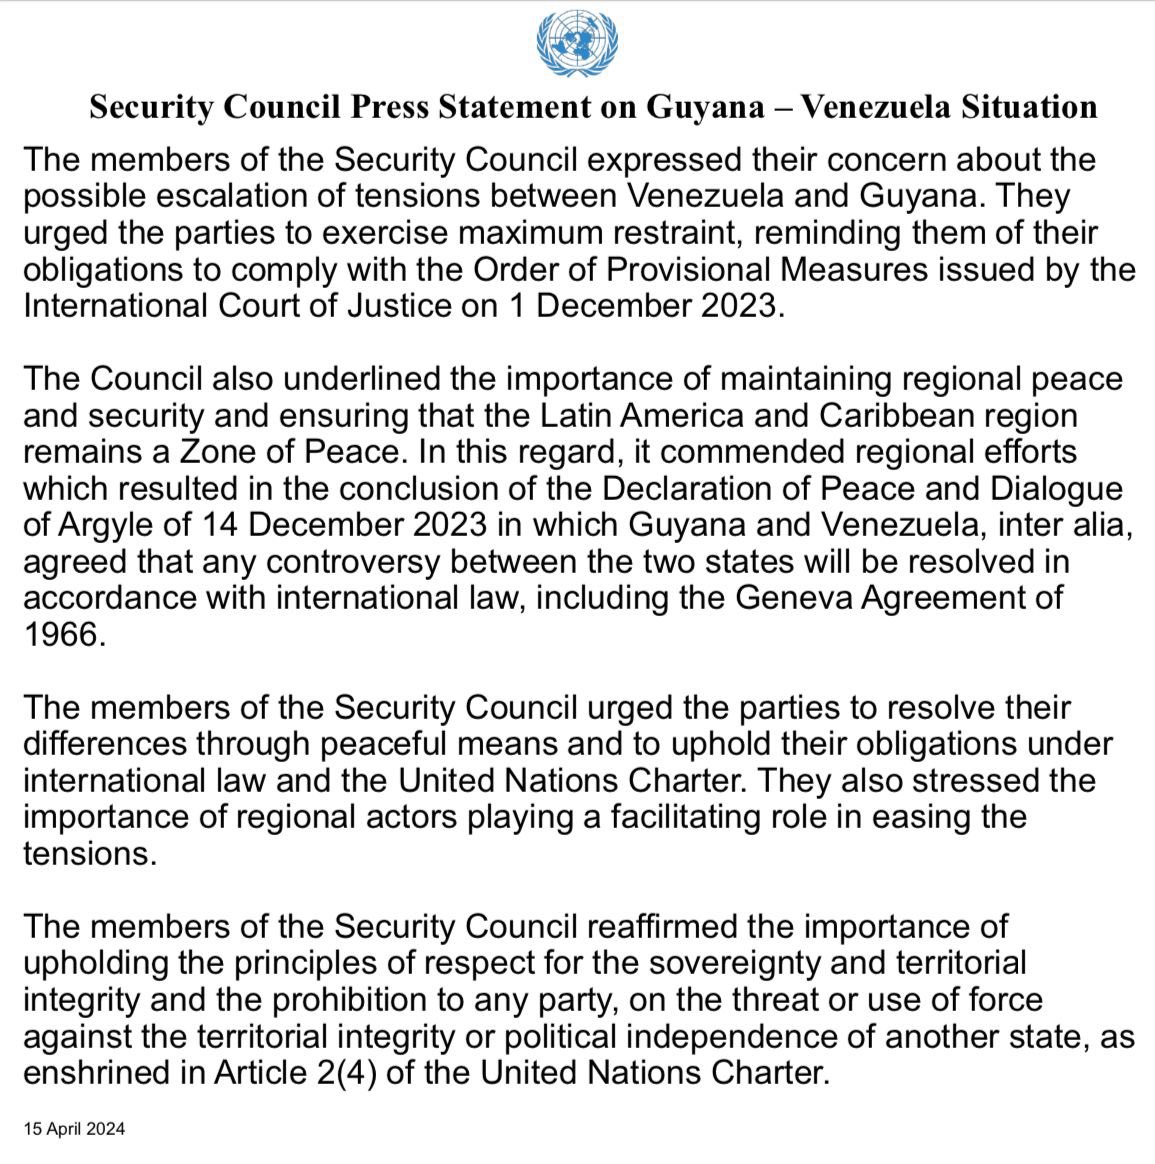 🇺🇳SC Press Statement #UNSC members express their concern about possible escalation of tensions between #Venezuela & #Guyana. They urged parties to exercise maximum restraint, reminding them of their obligations to comply w/ the Order of Provisional Measures issued by @CIJ_ICJ ⬇️